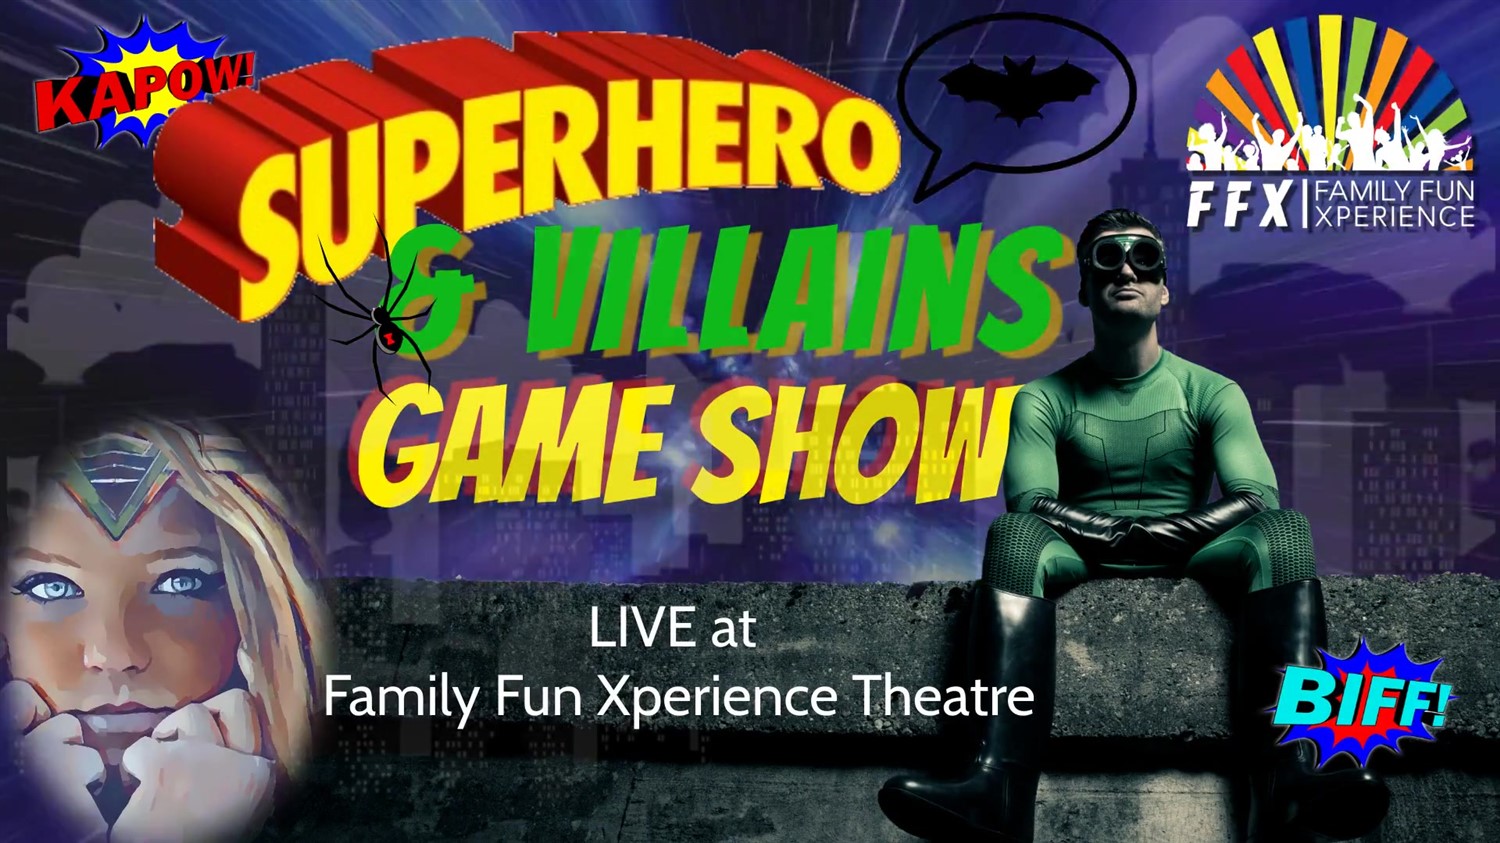 Superheroes & Villains Live Game Show Super fun for everyone! on Jan 22, 19:00@FFX Theatre - Buy tickets and Get information on Family Fun Xperience tickets.ffxshow.org